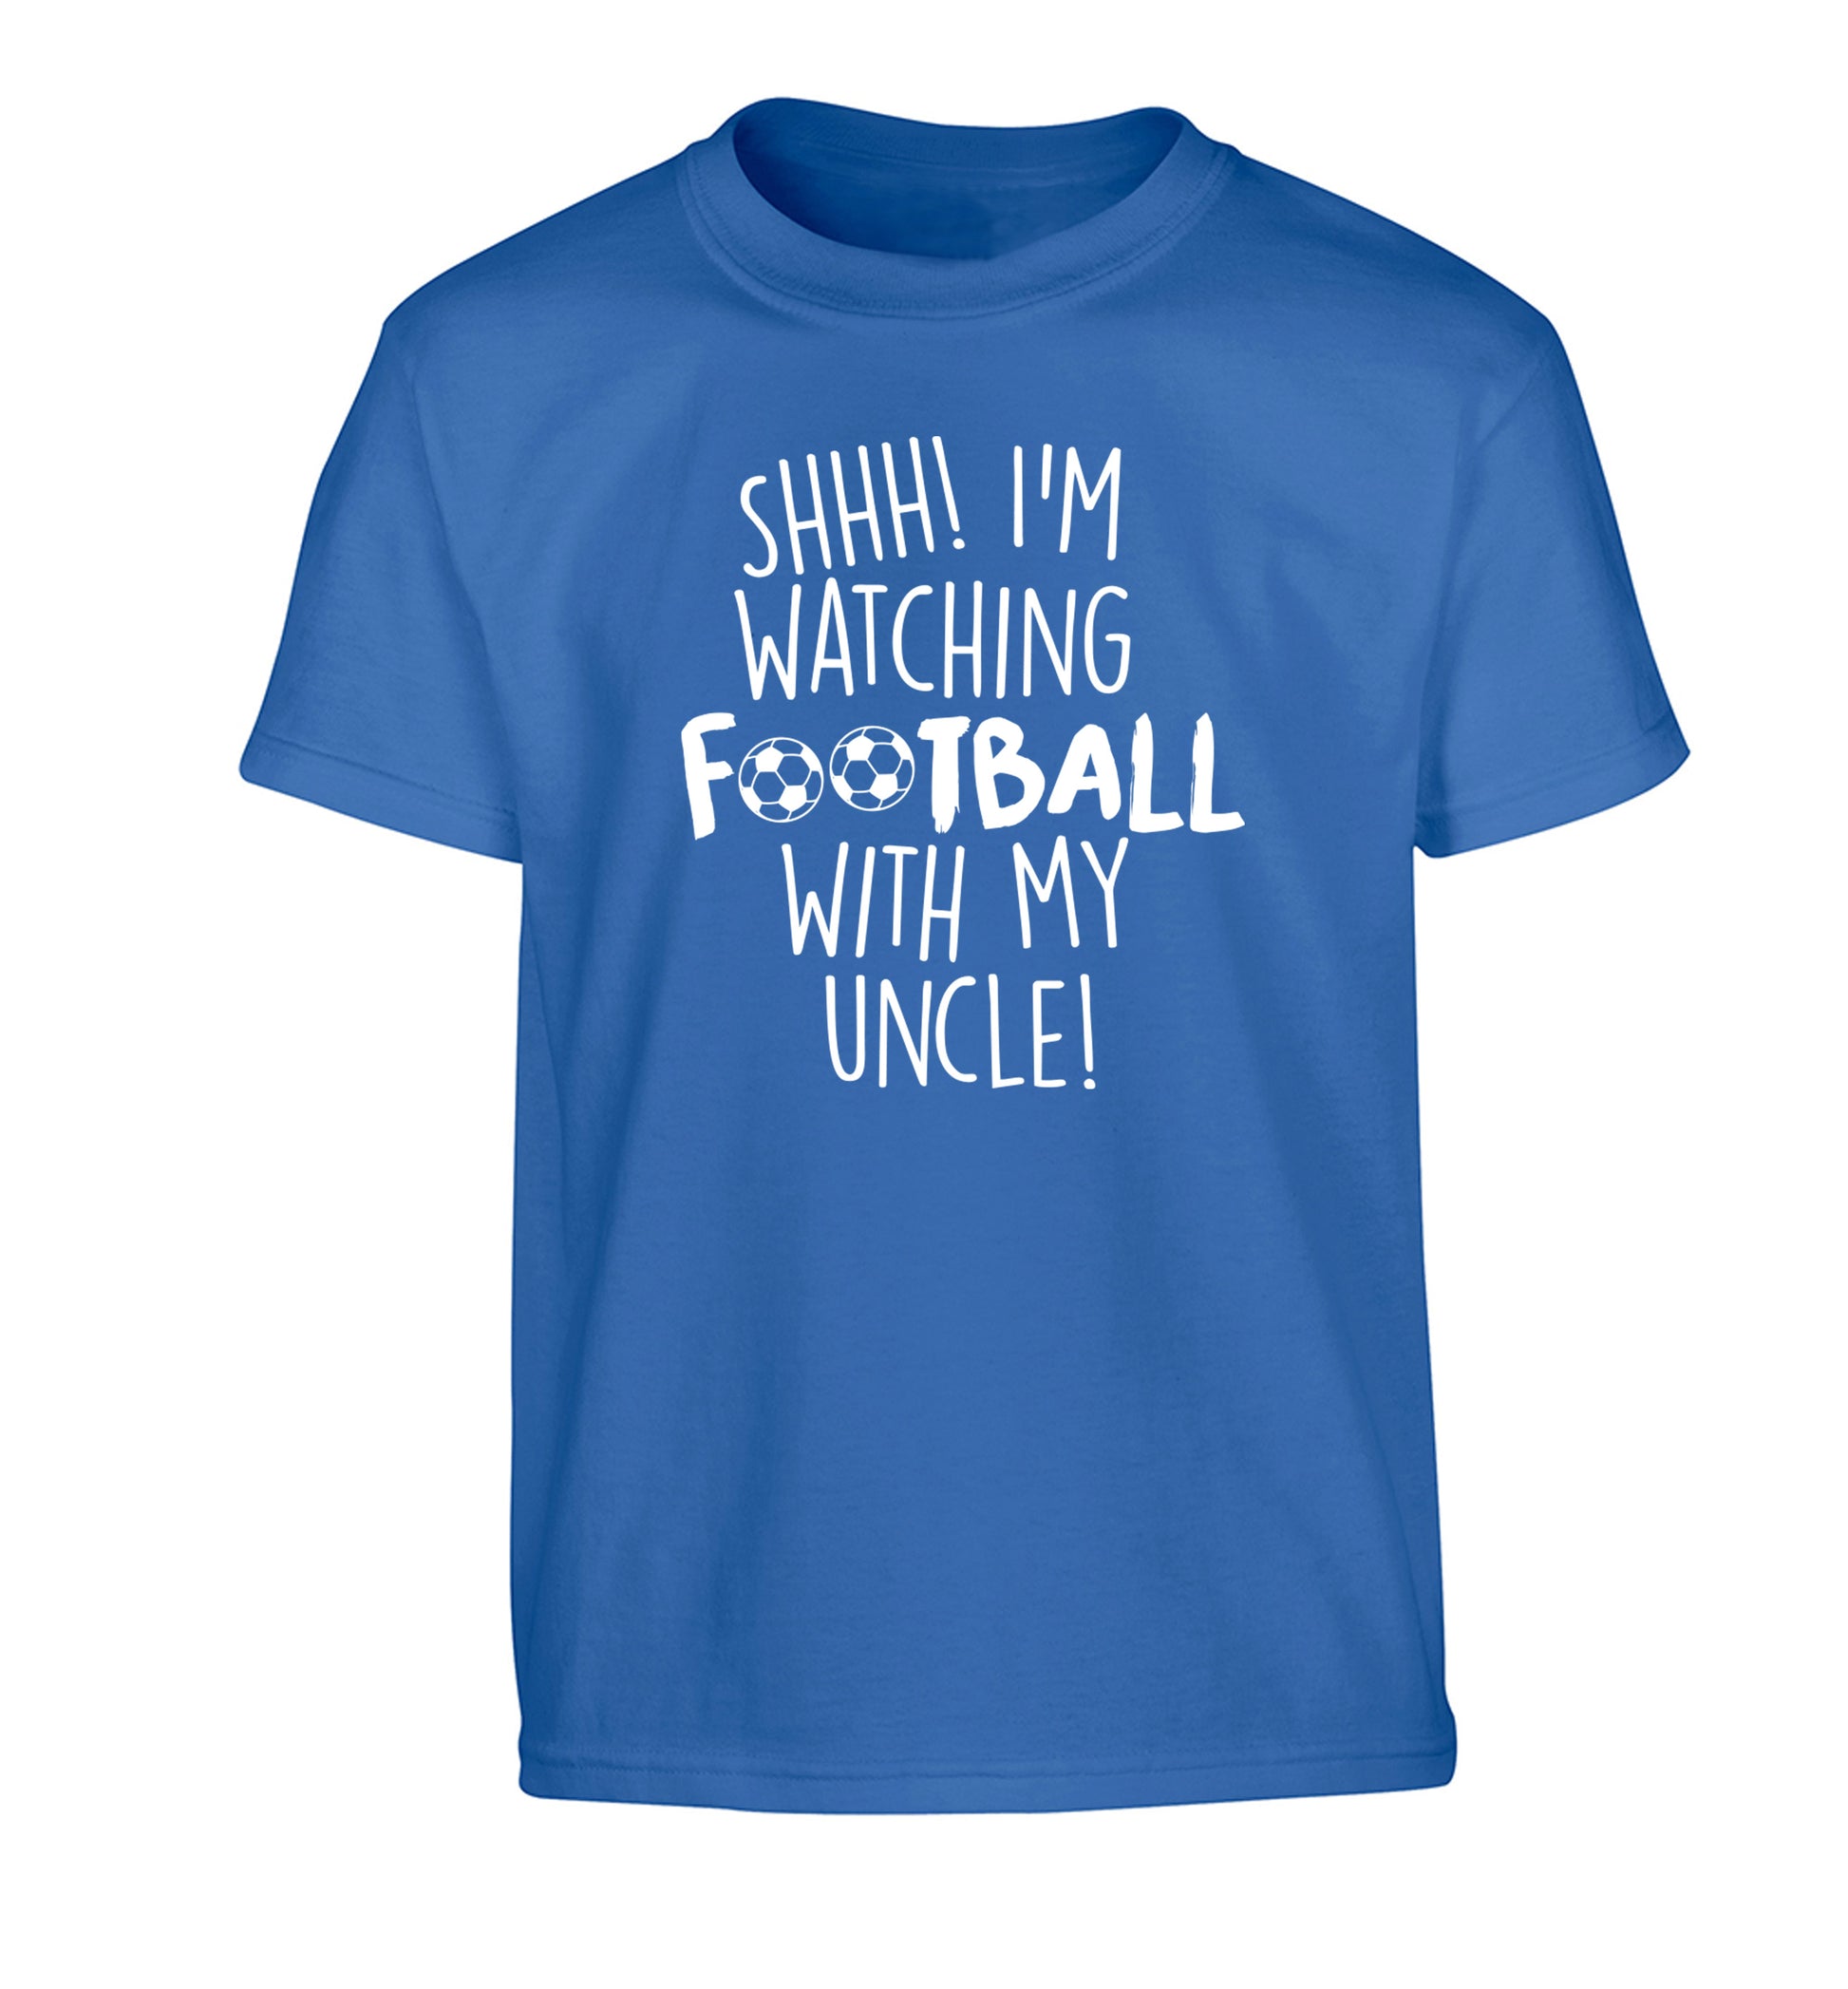 Shhh I'm watching football with my uncle Children's blue Tshirt 12-14 Years